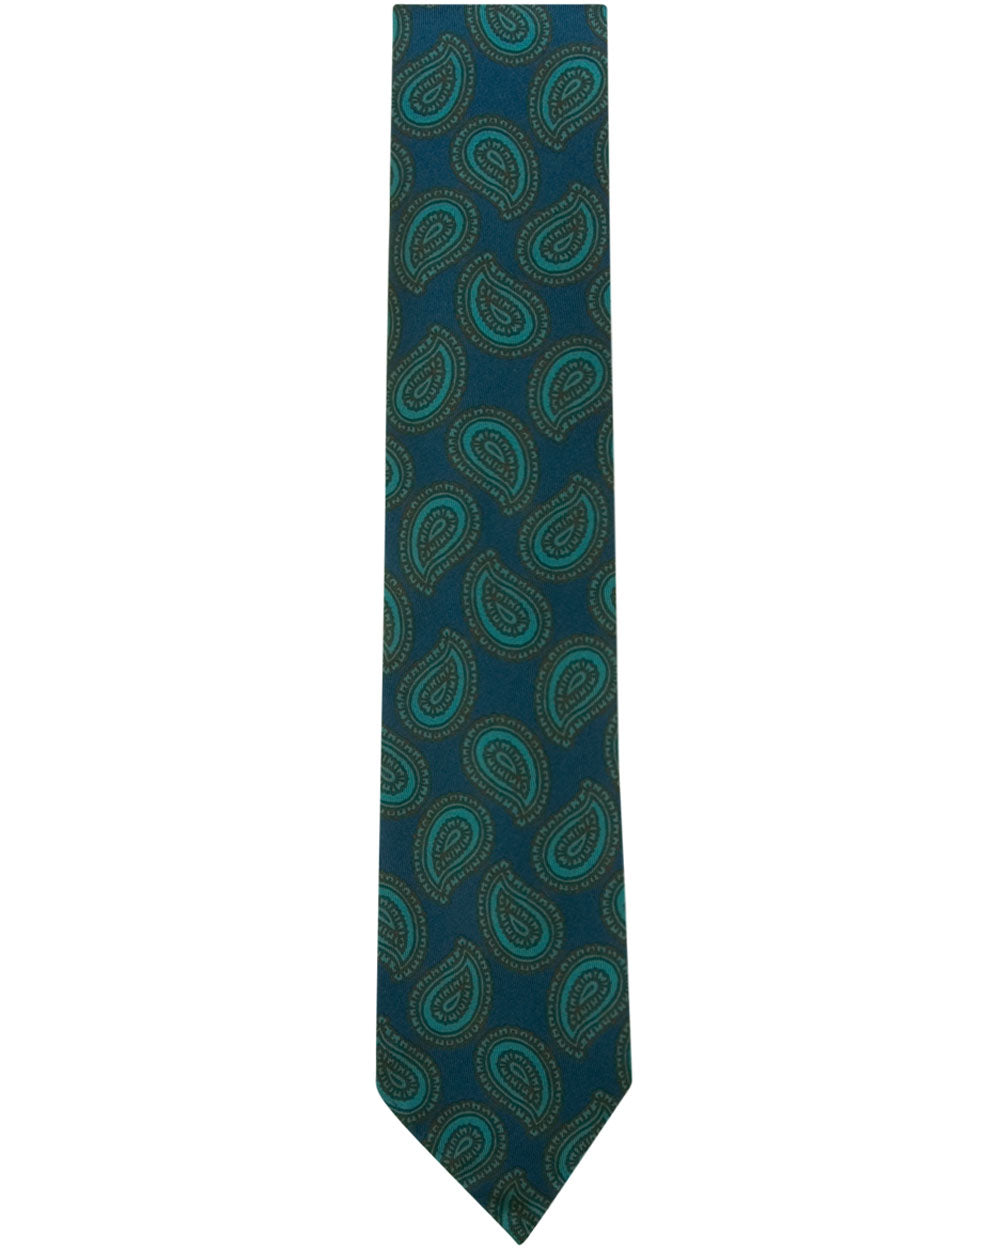 French Blue and Teal Paisley Tie